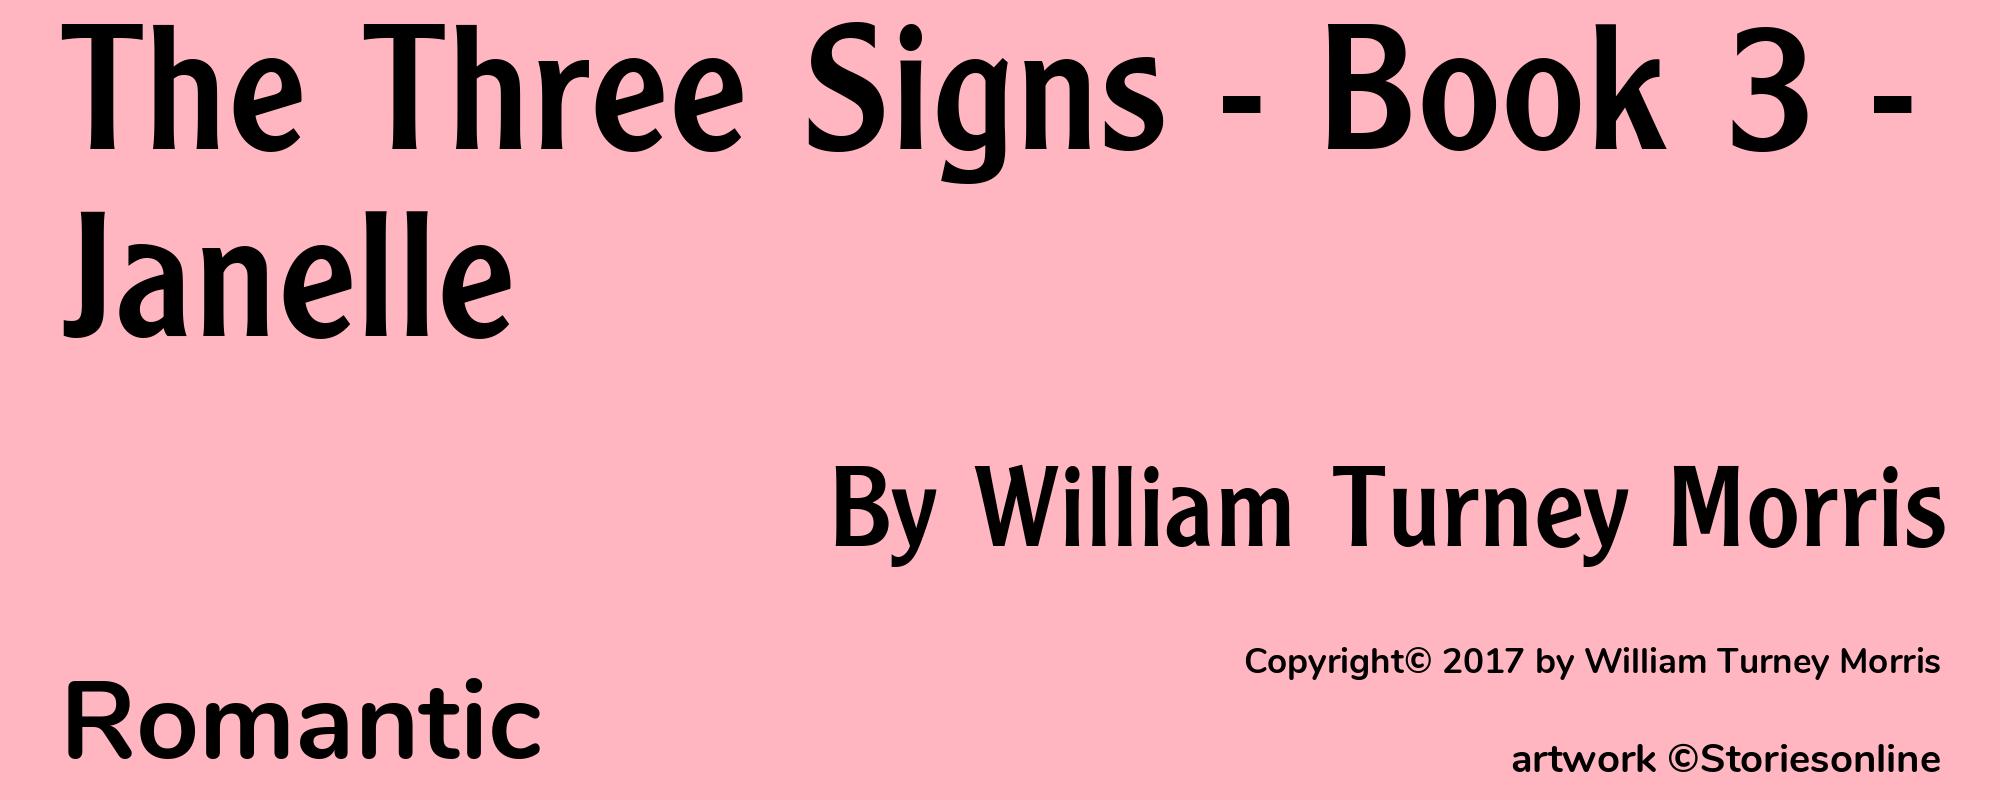 The Three Signs - Book 3 - Janelle - Cover